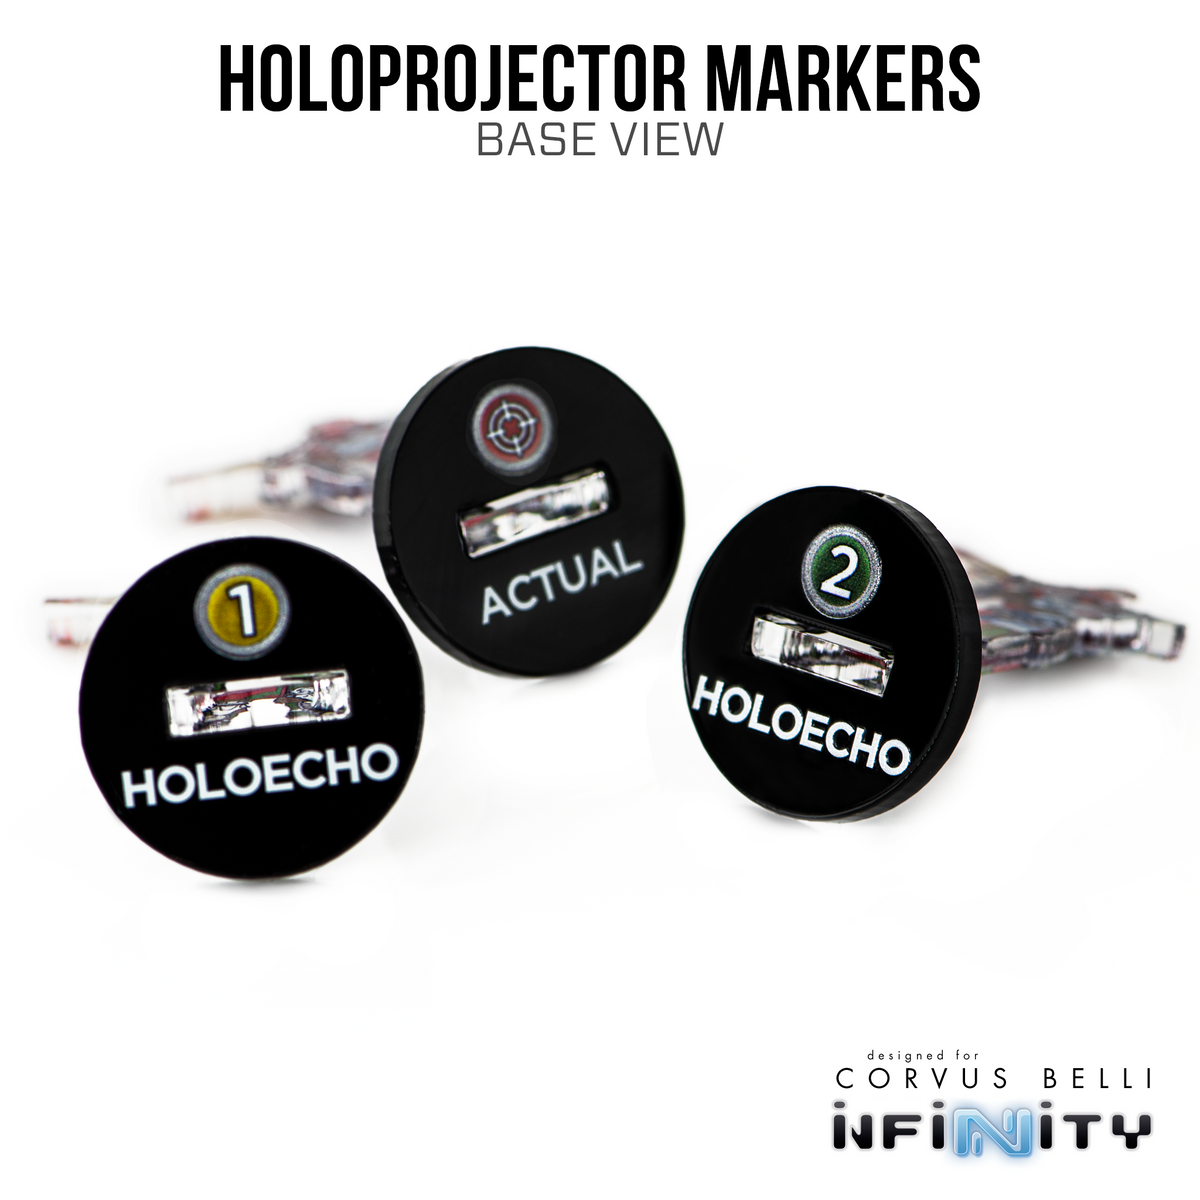 3D Holoprojector / Decoy Markers